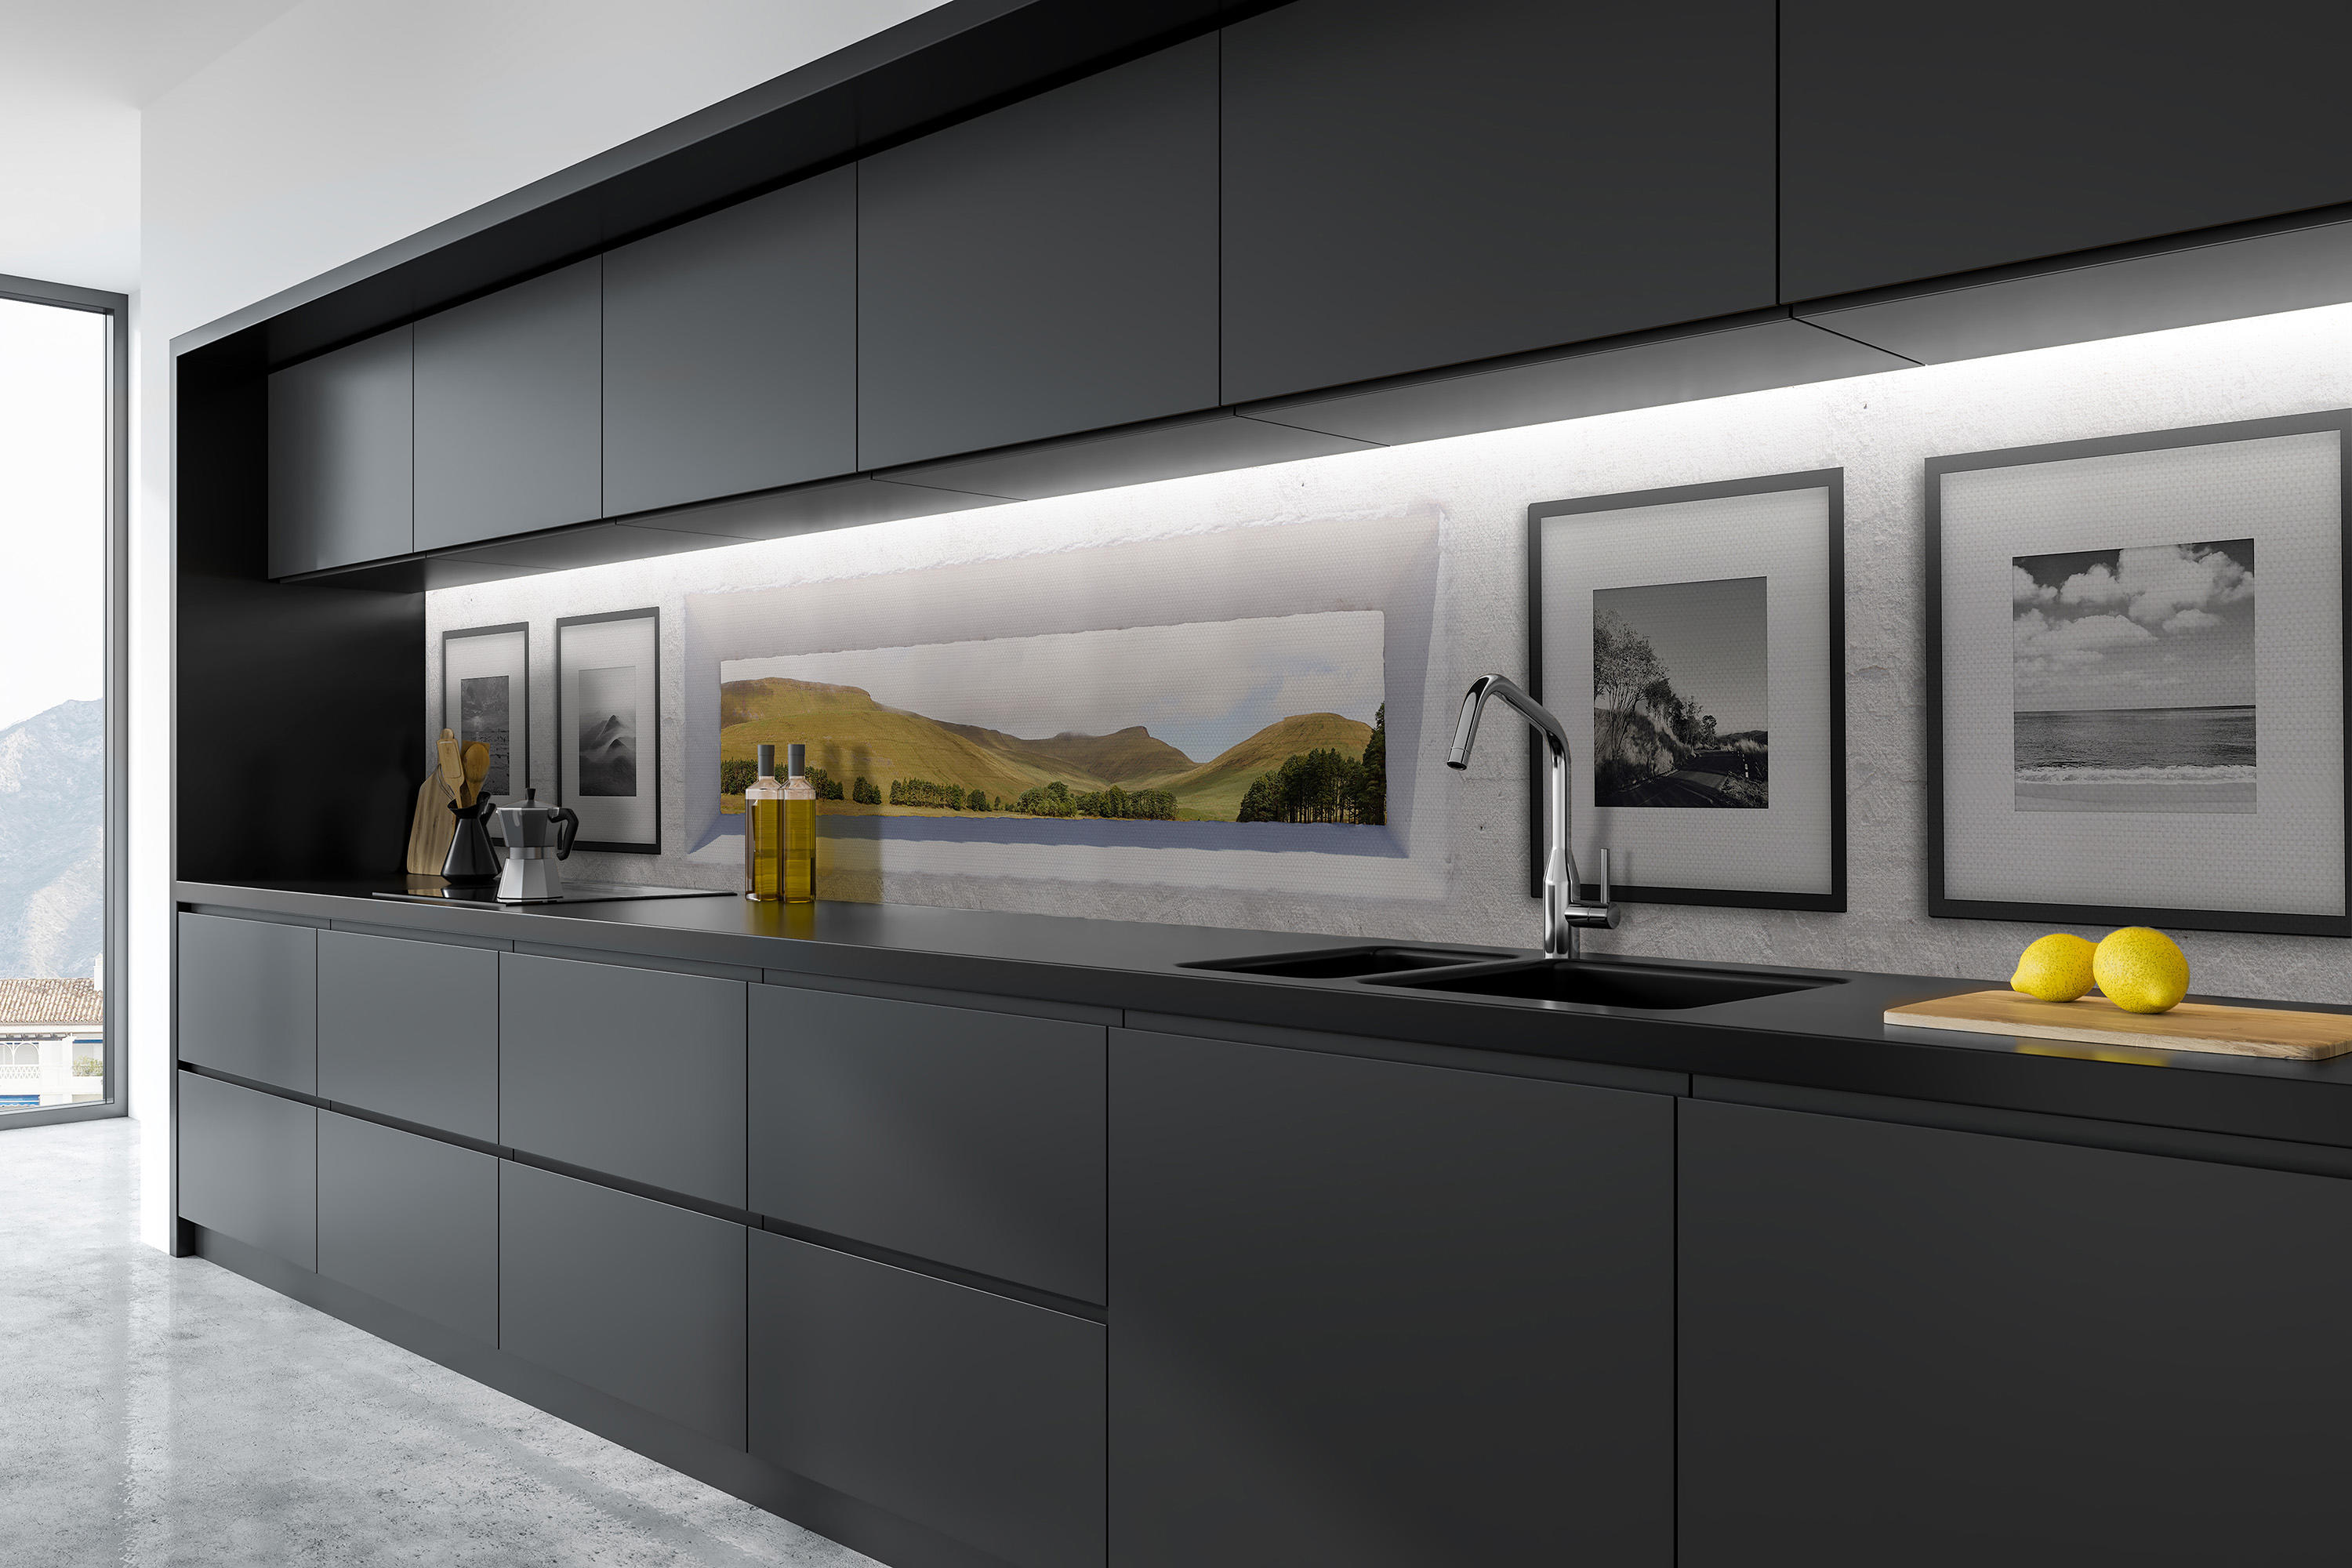 ART KITCHEN - Wall protection from INSTABILELAB | Architonic